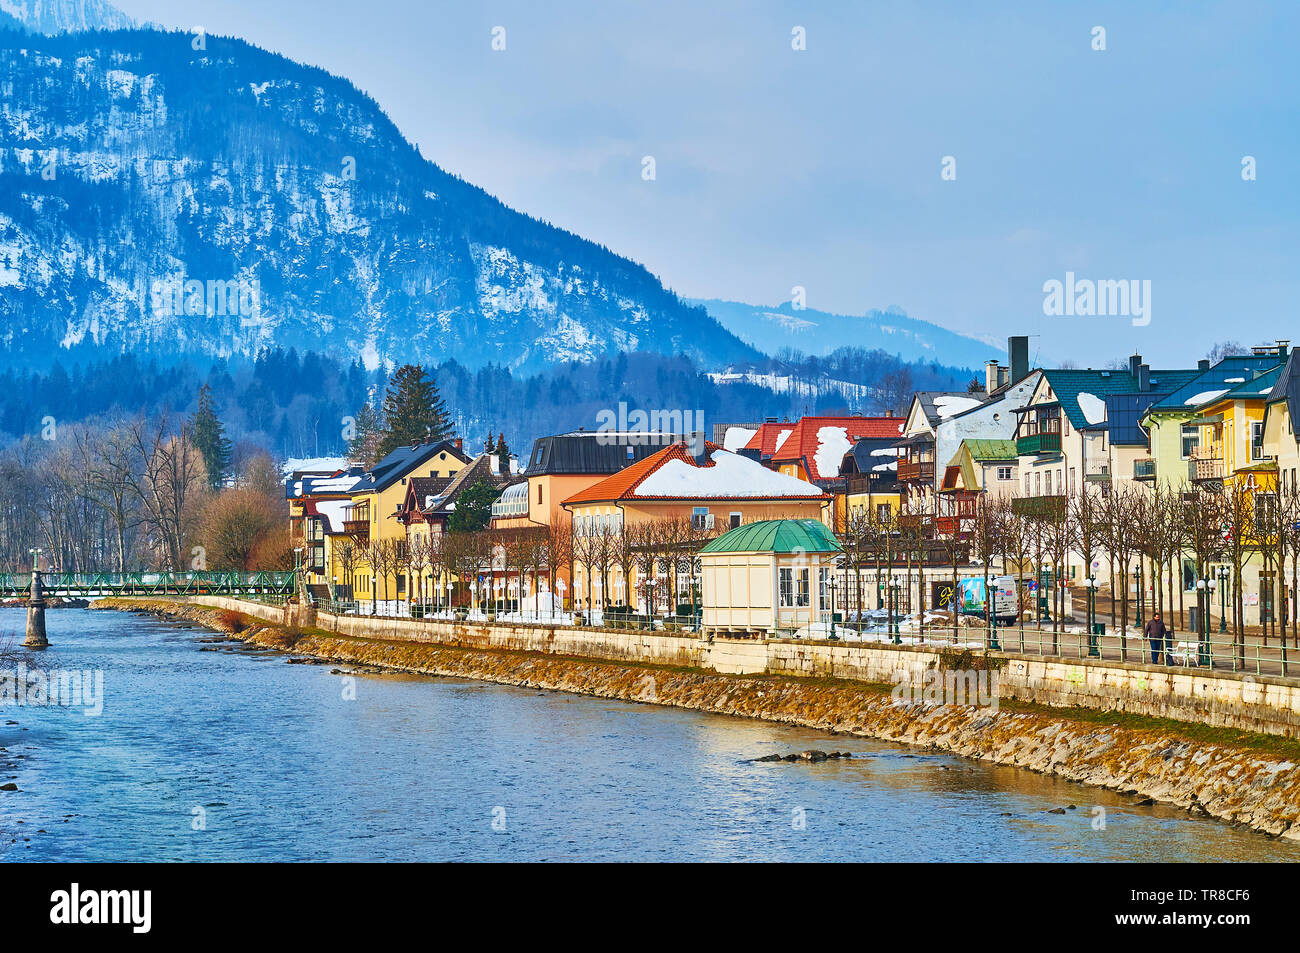 BAD ISCHL, AUSTRIA - FEBRUARY 20, 2019: Esplanade embankment of Traun river with a view on historic quarters, colorful townhouses, souvenir stores and Stock Photo